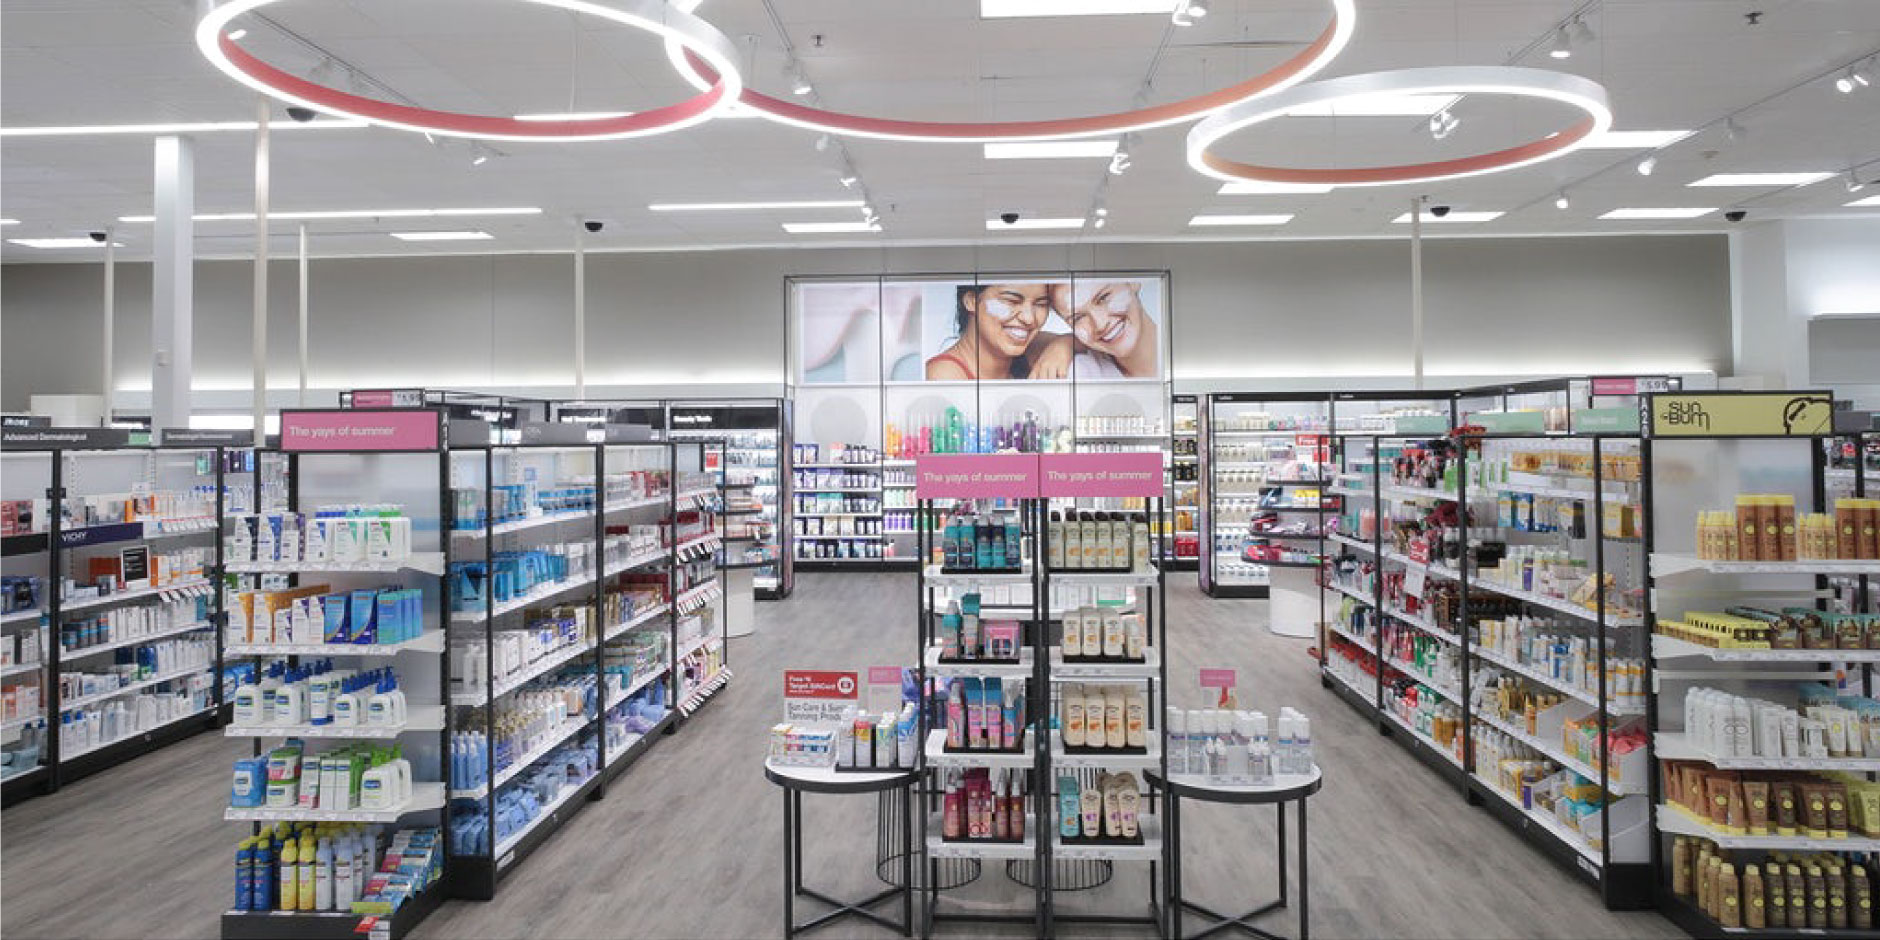 Black-Owned Brands See an Opening in the Beauty Aisle